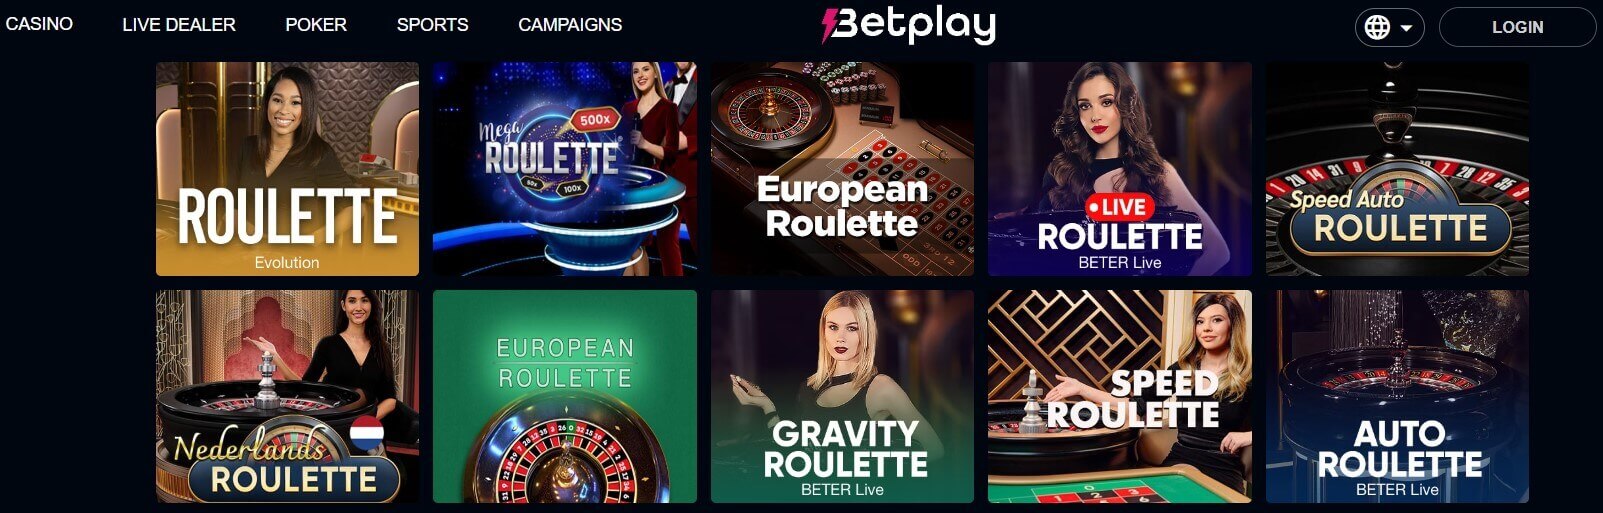 betplay casino for ethereum roulette